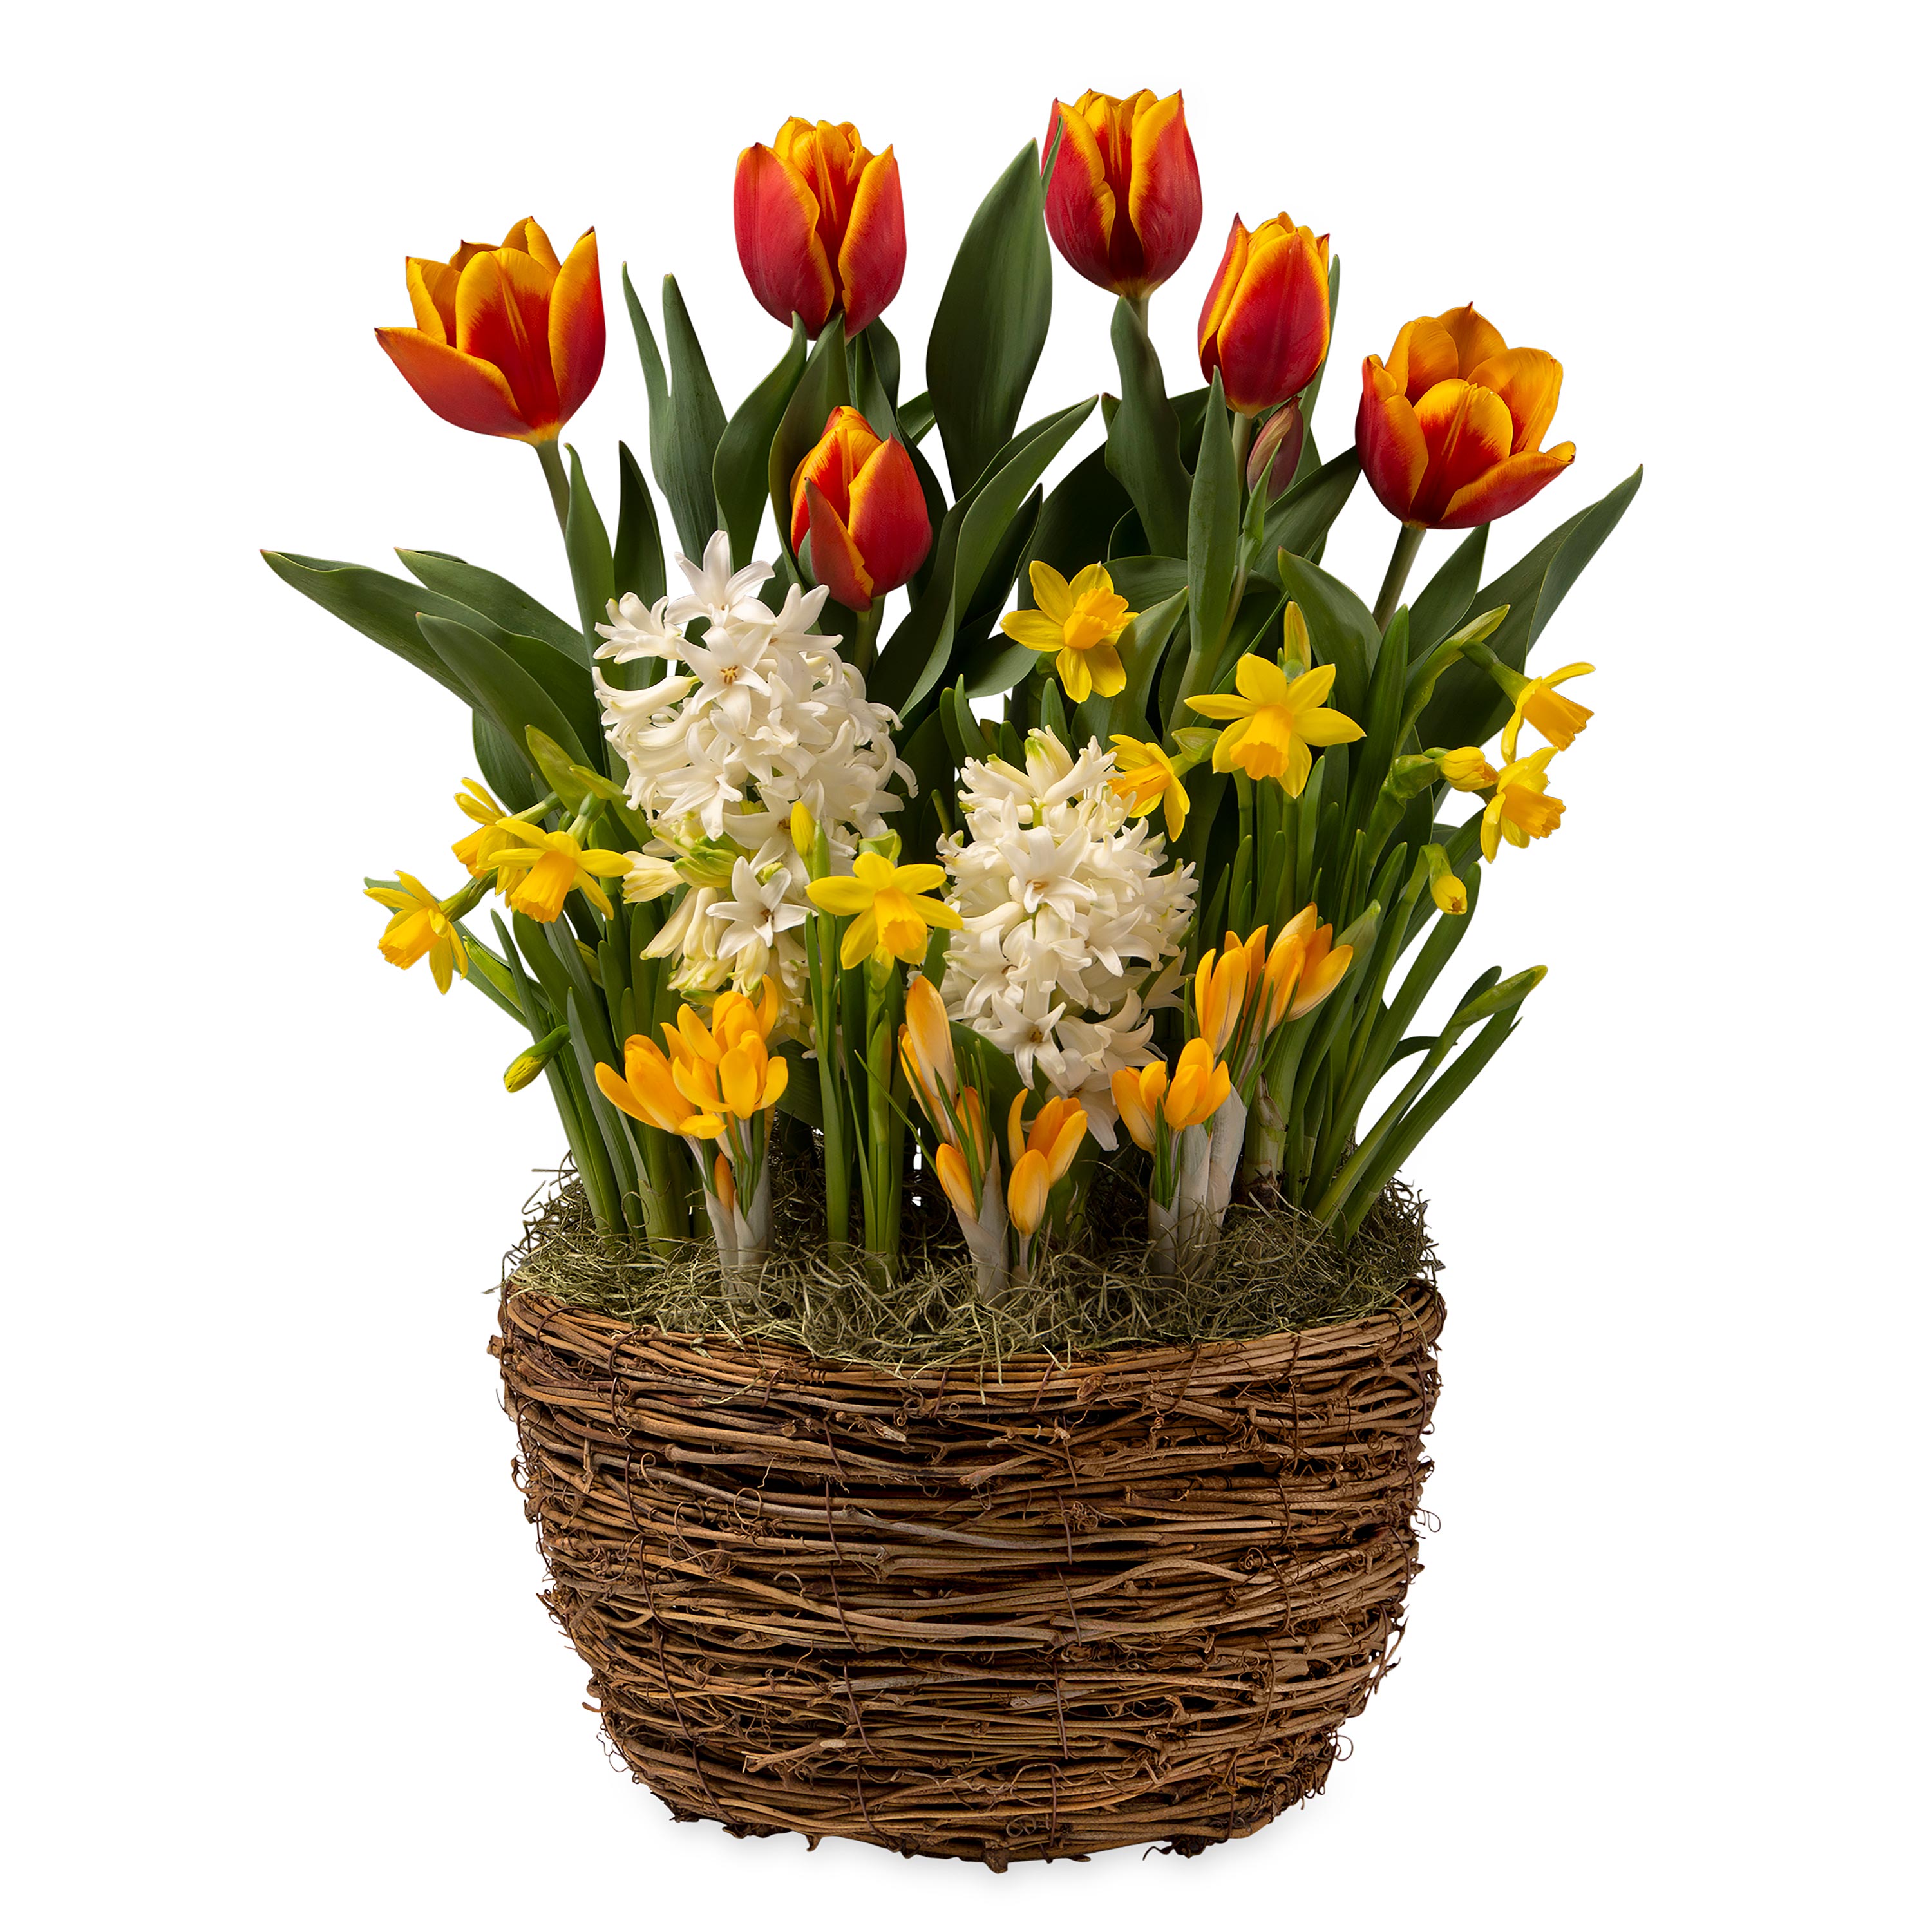 Tulips, Hyacinths, Narcissus and Crocus Flower Bulb Gift Garden